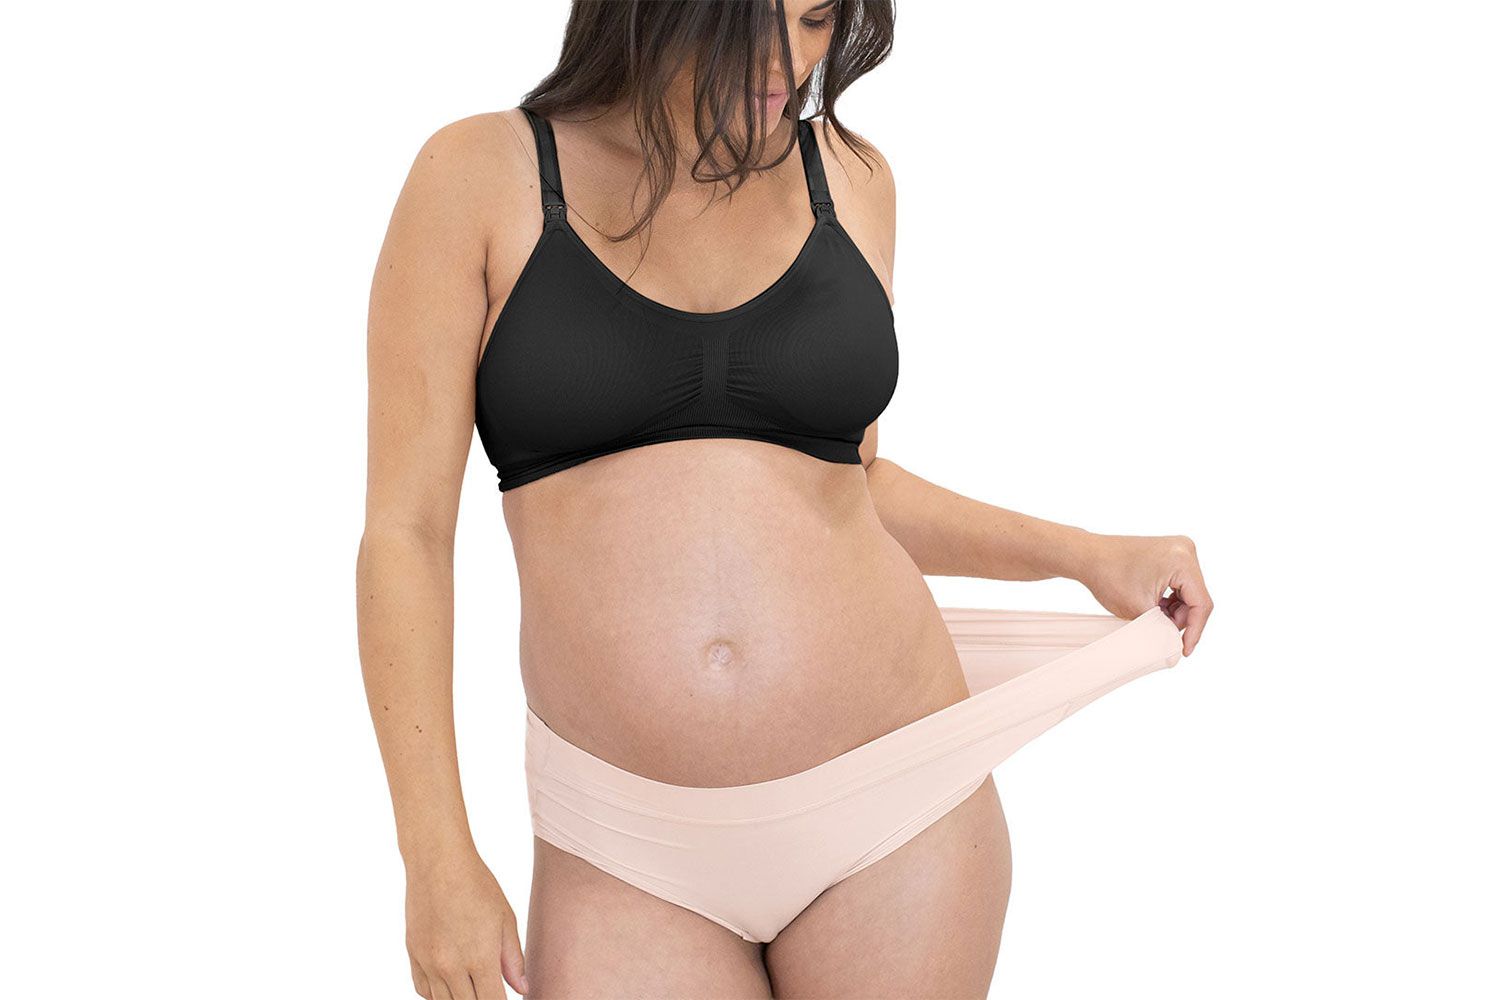 dorothy hillier recommends pregnant women in thongs pic